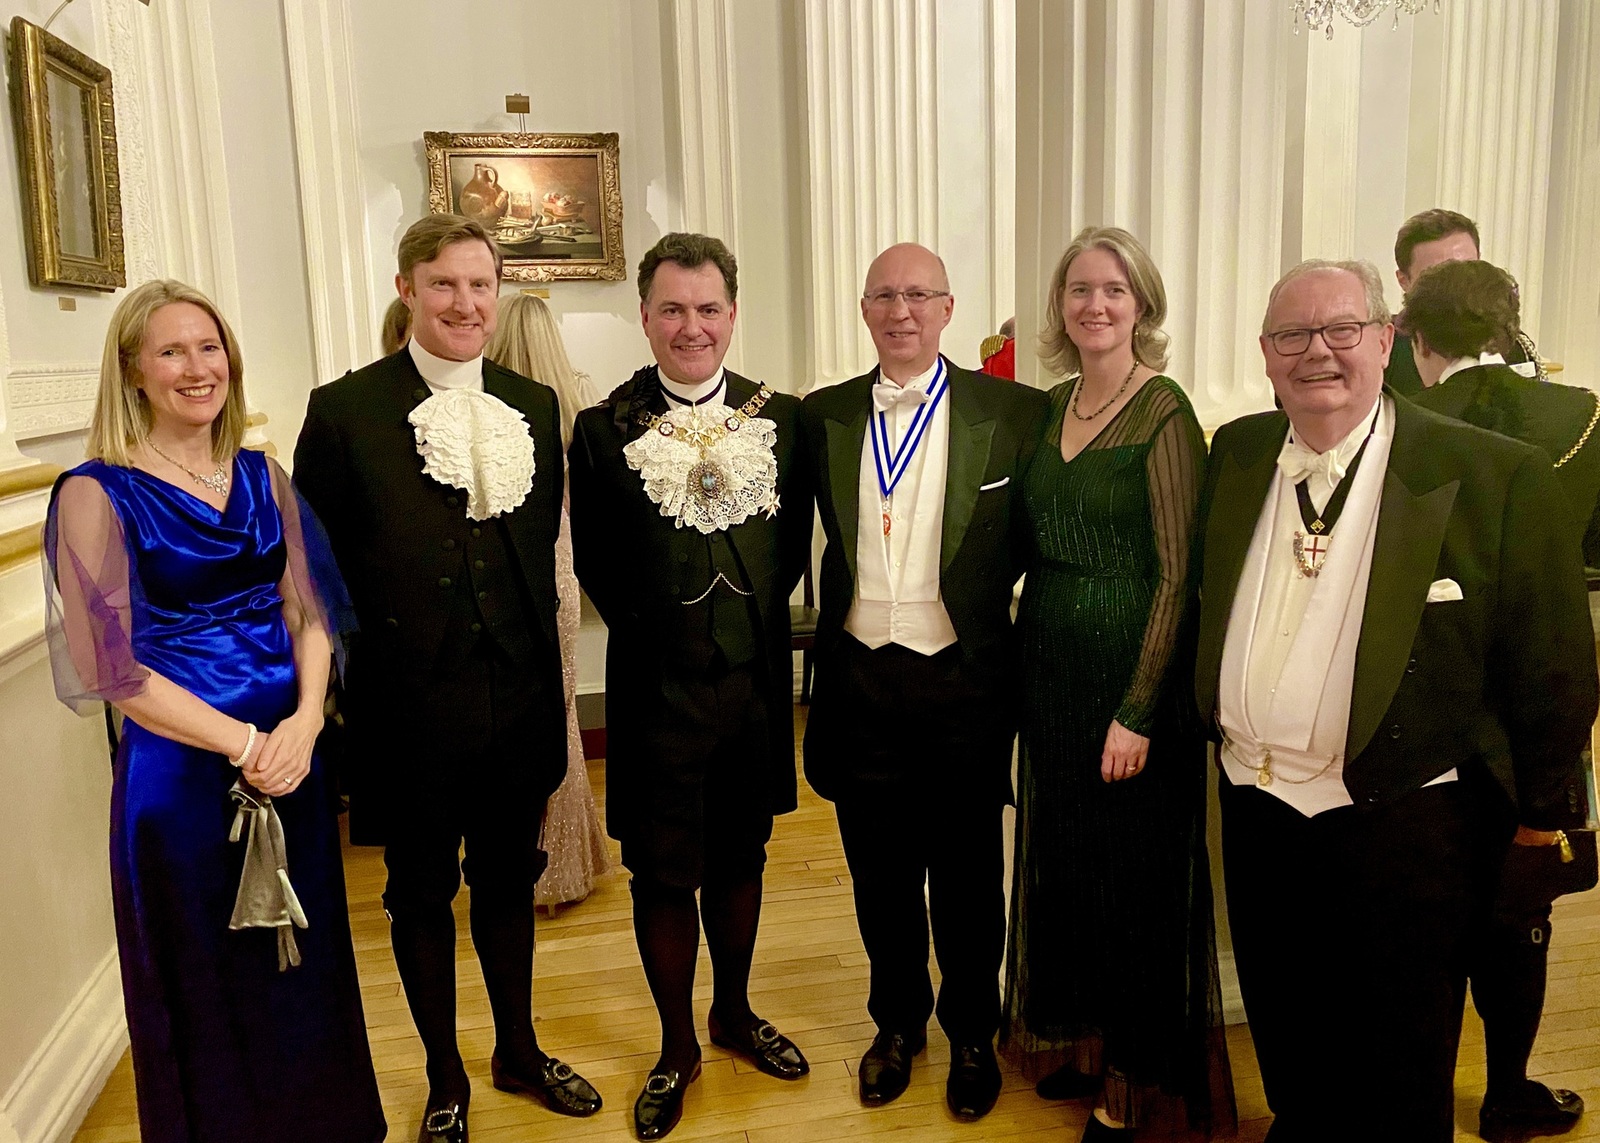 A delightful evening at the Lord Mayor’s Banquet to the Masters (Alderman and Mrs Hughes-Penny, the Lord Mayor, Master of the Guild of Investment Managers Phil Clark and Mrs Clark)